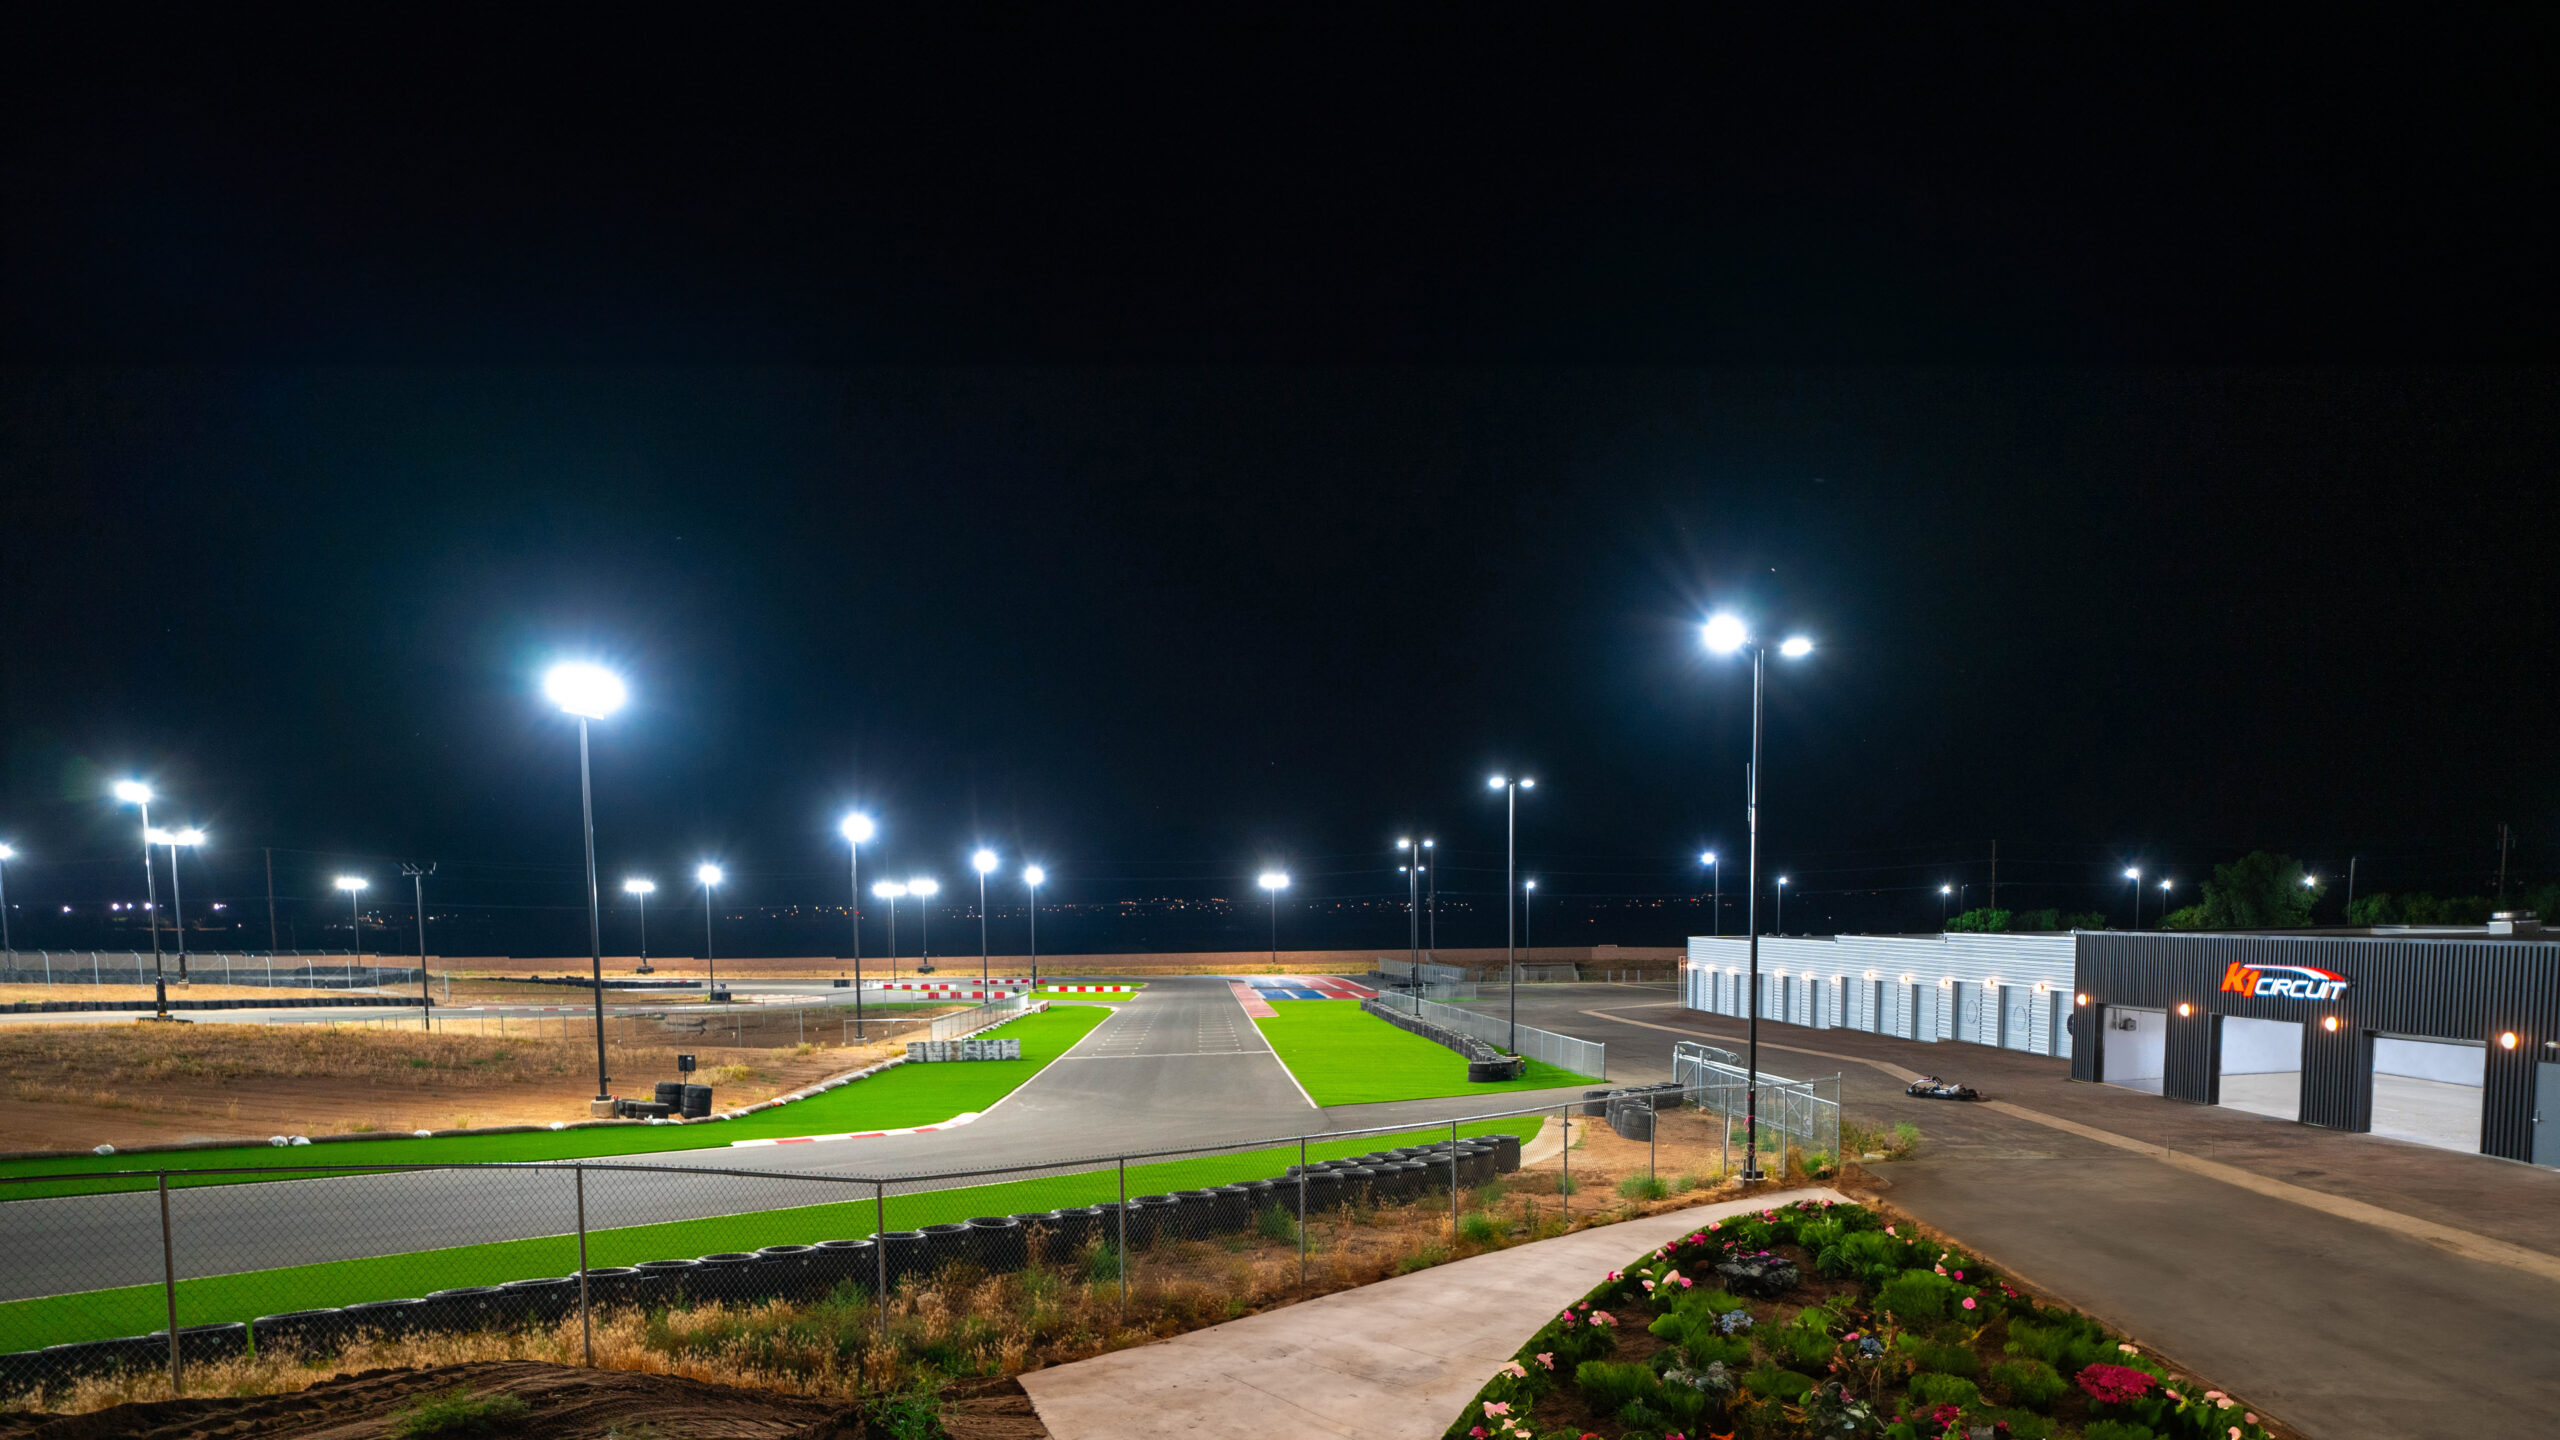 the main straight at k1 circuit at night with lights